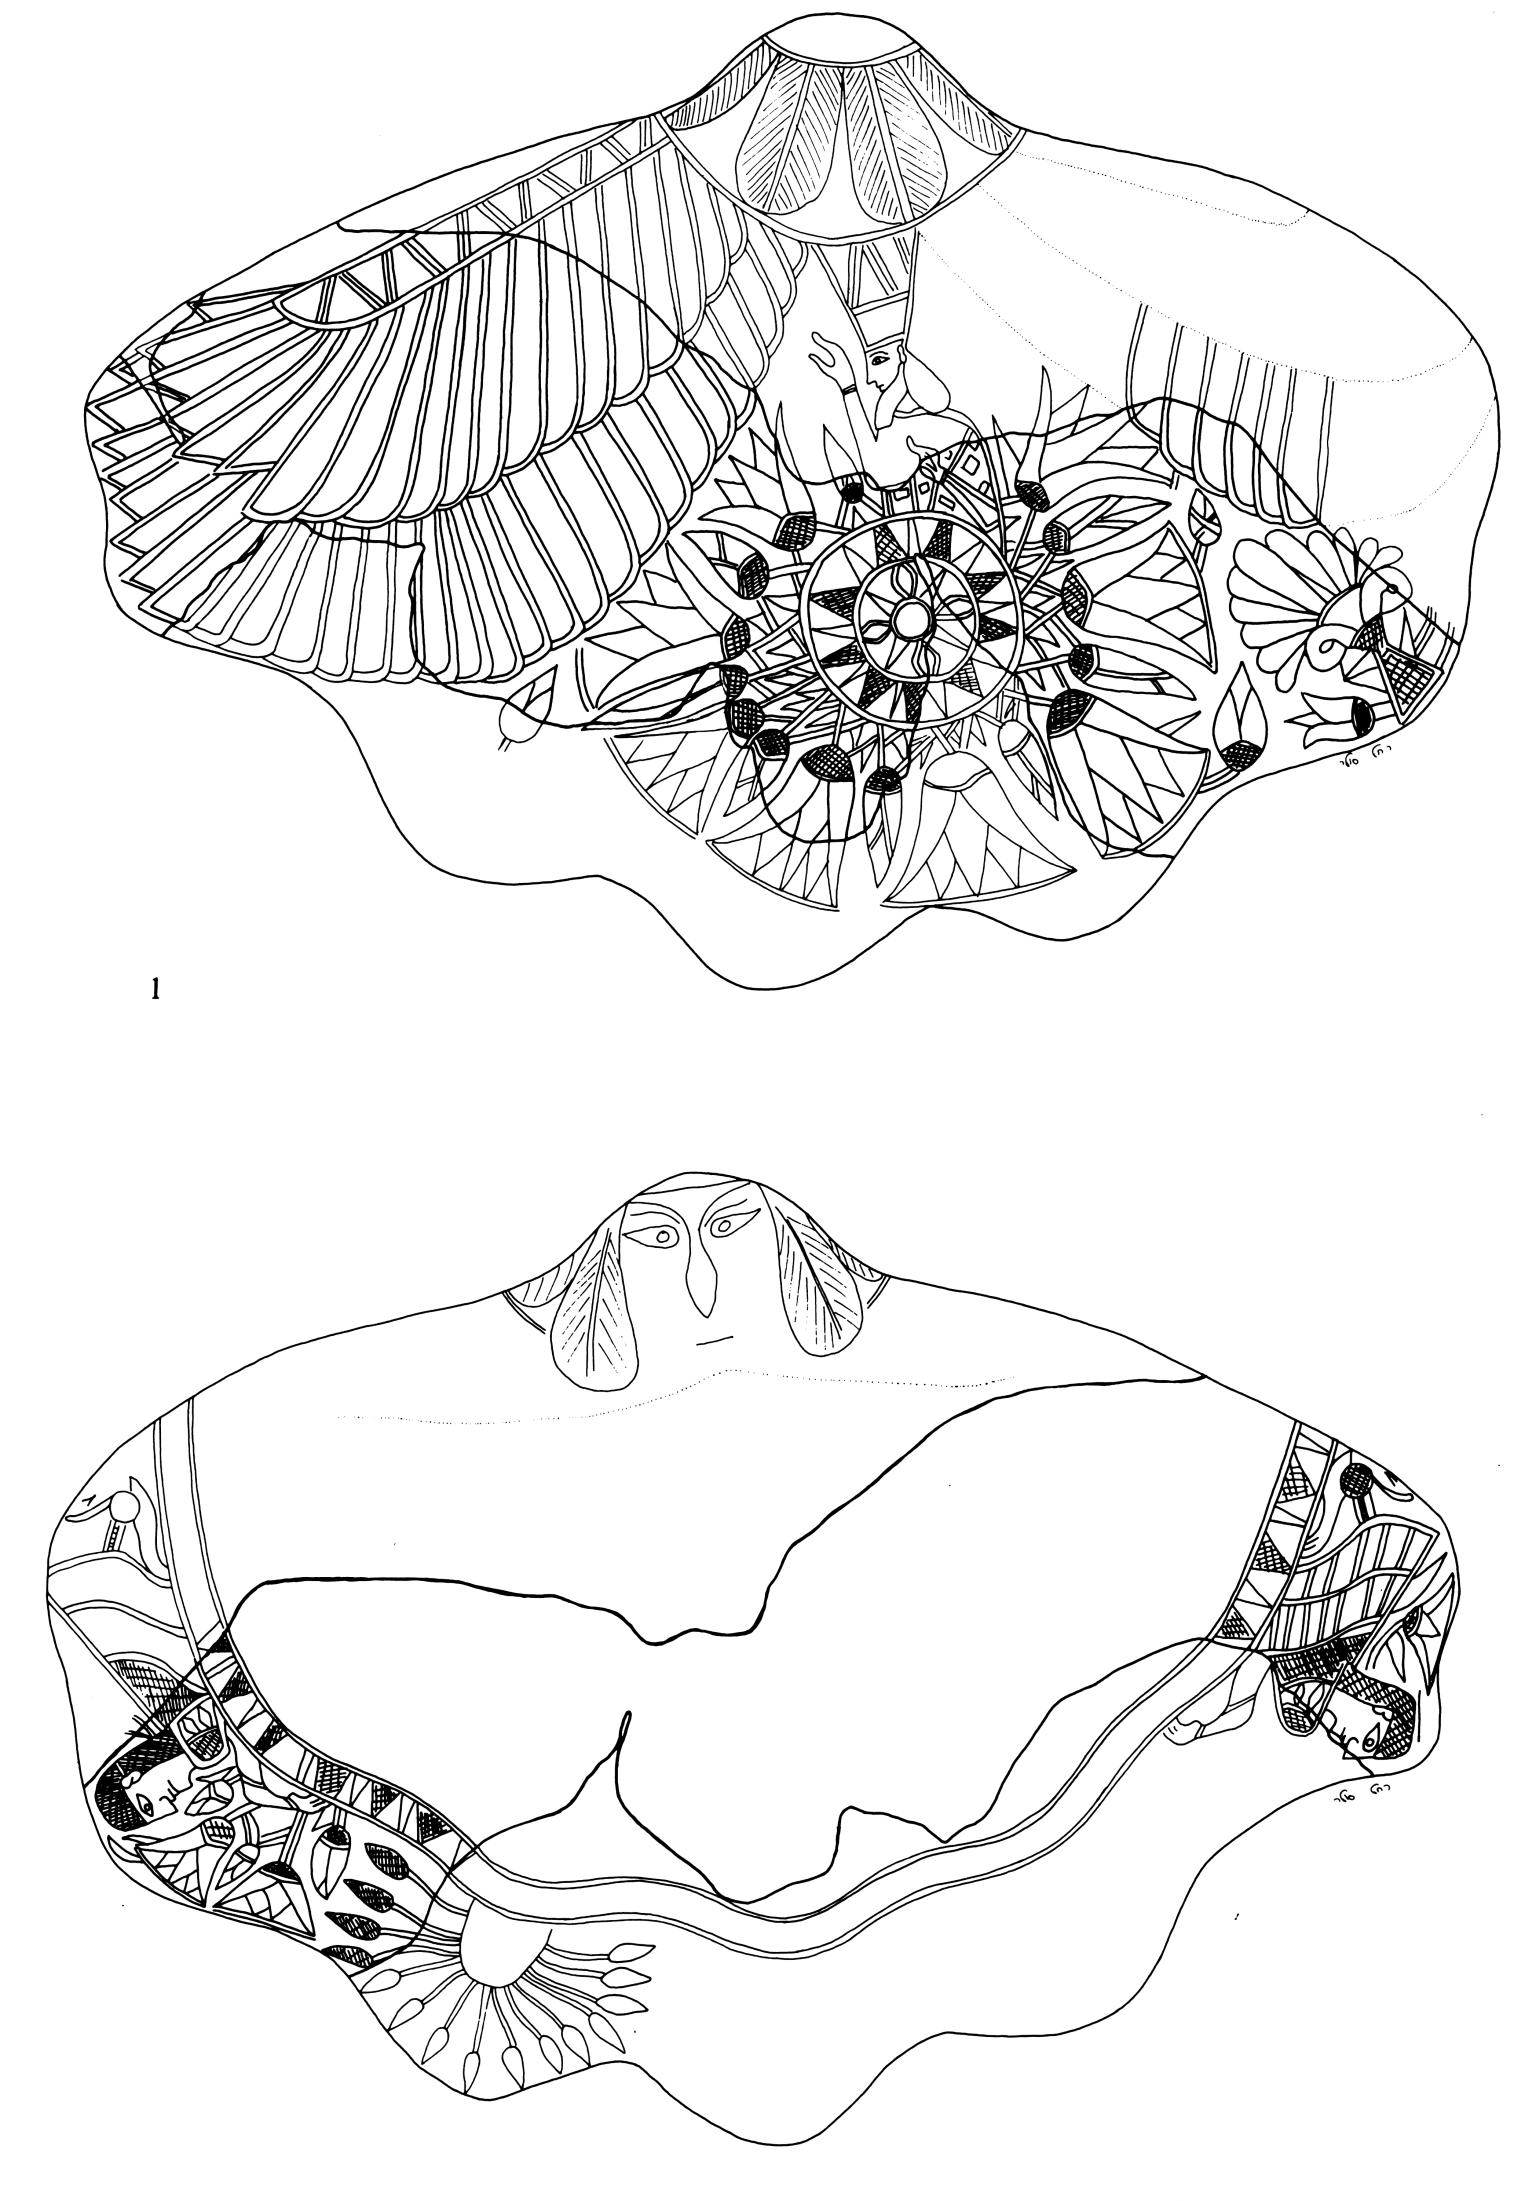 Drawing of clam shell inscribed with fronds, figure in crown, and geometric patterns, above another drawing of clam shell inscribed with face in center, and winged sphinxes, lotuses, and floral motifs around the edge. 